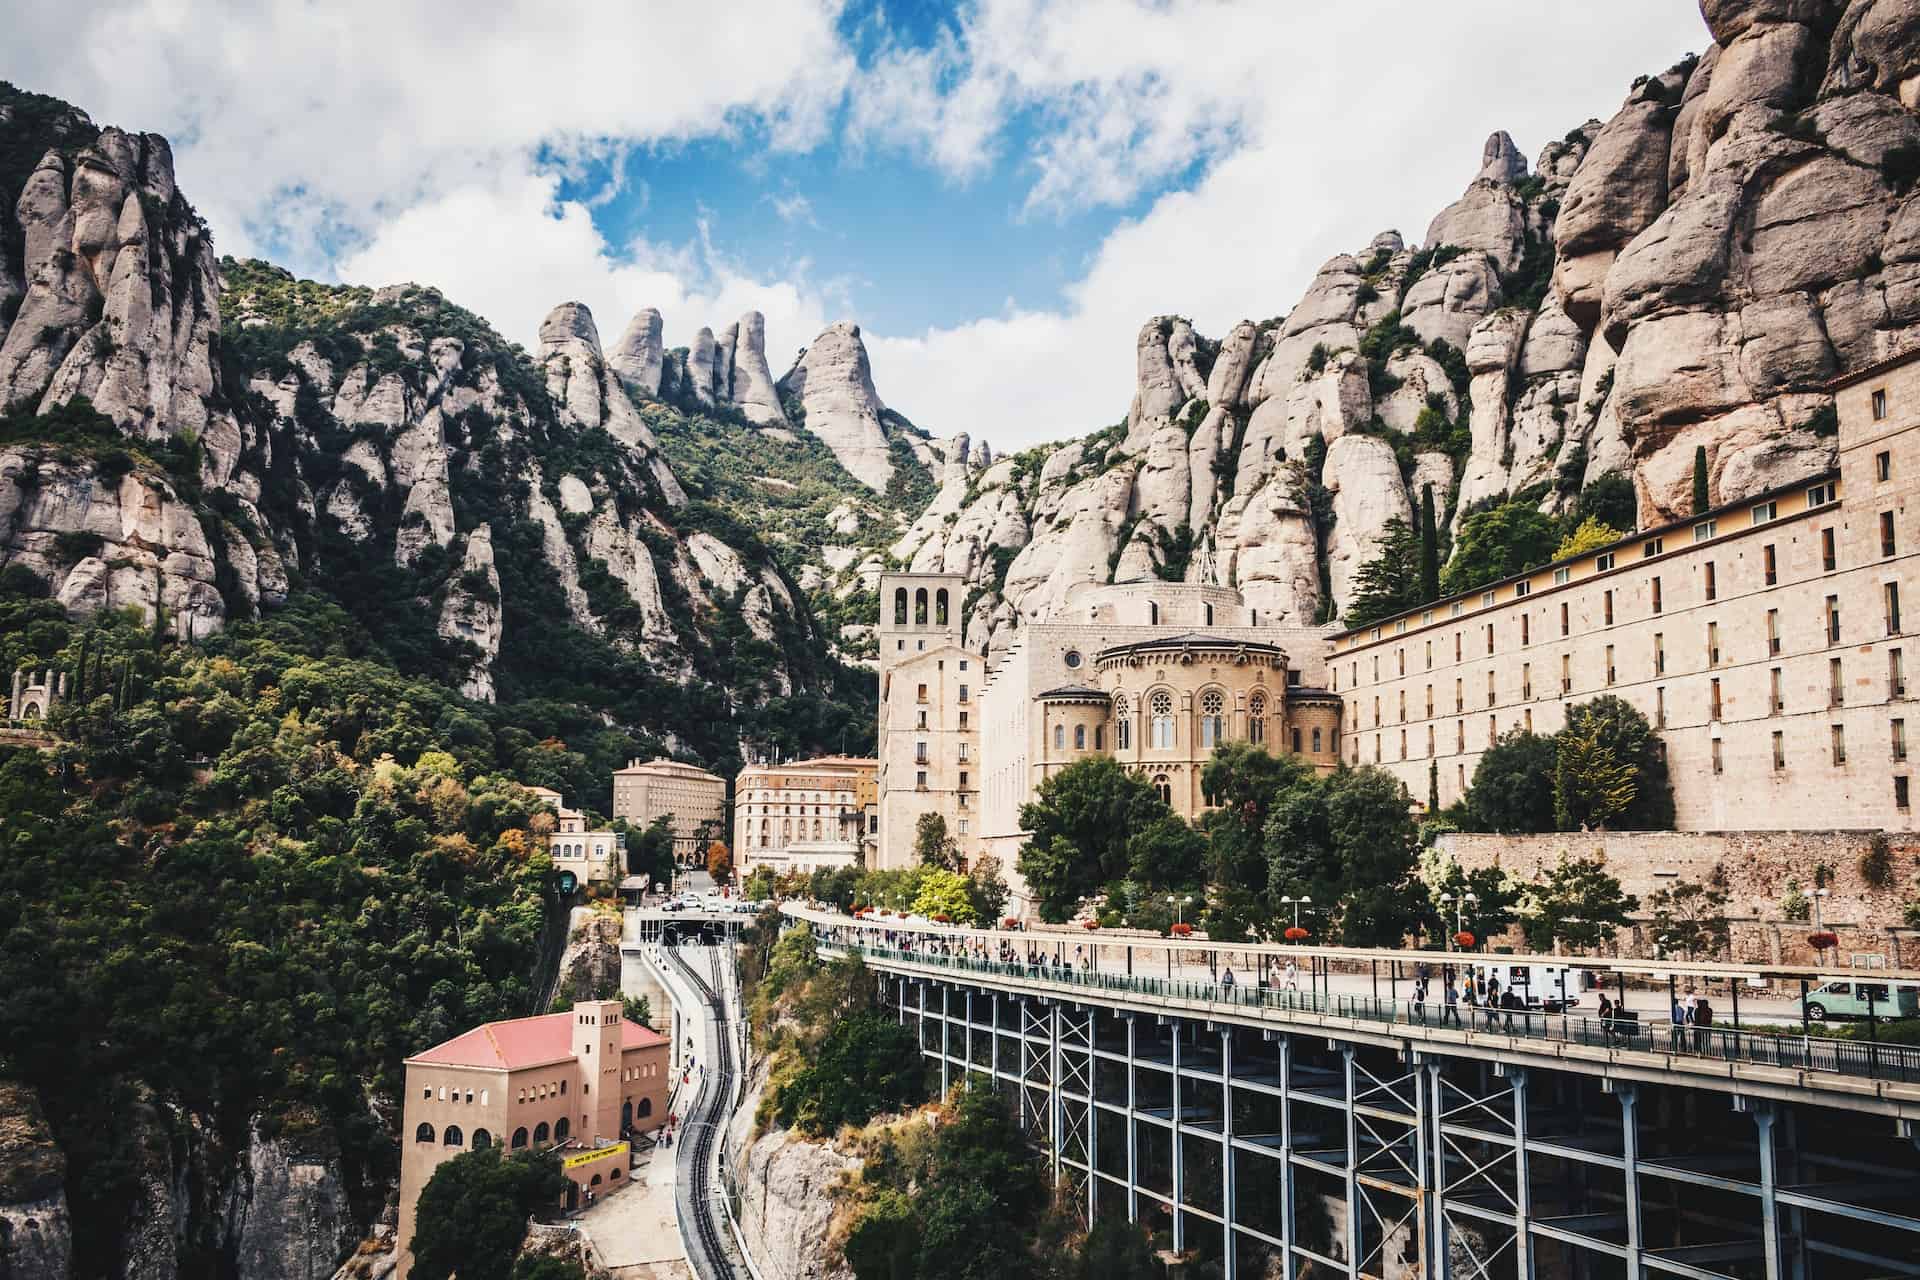 Visit Montserrat on a day trip from Barcelona